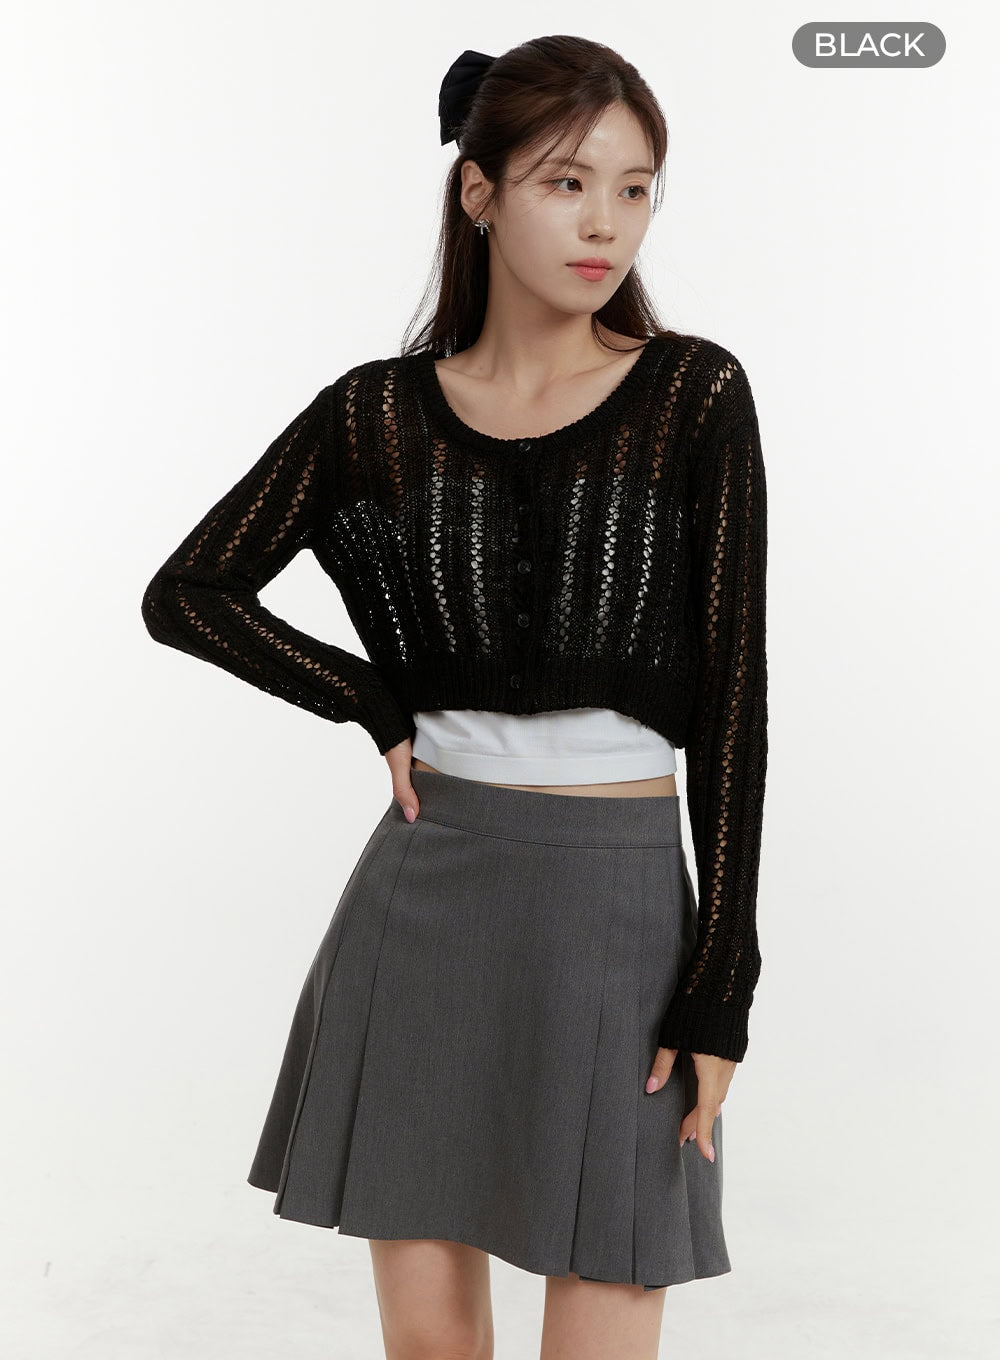 hollow-out-cropped-cardigan-oy409 / Black